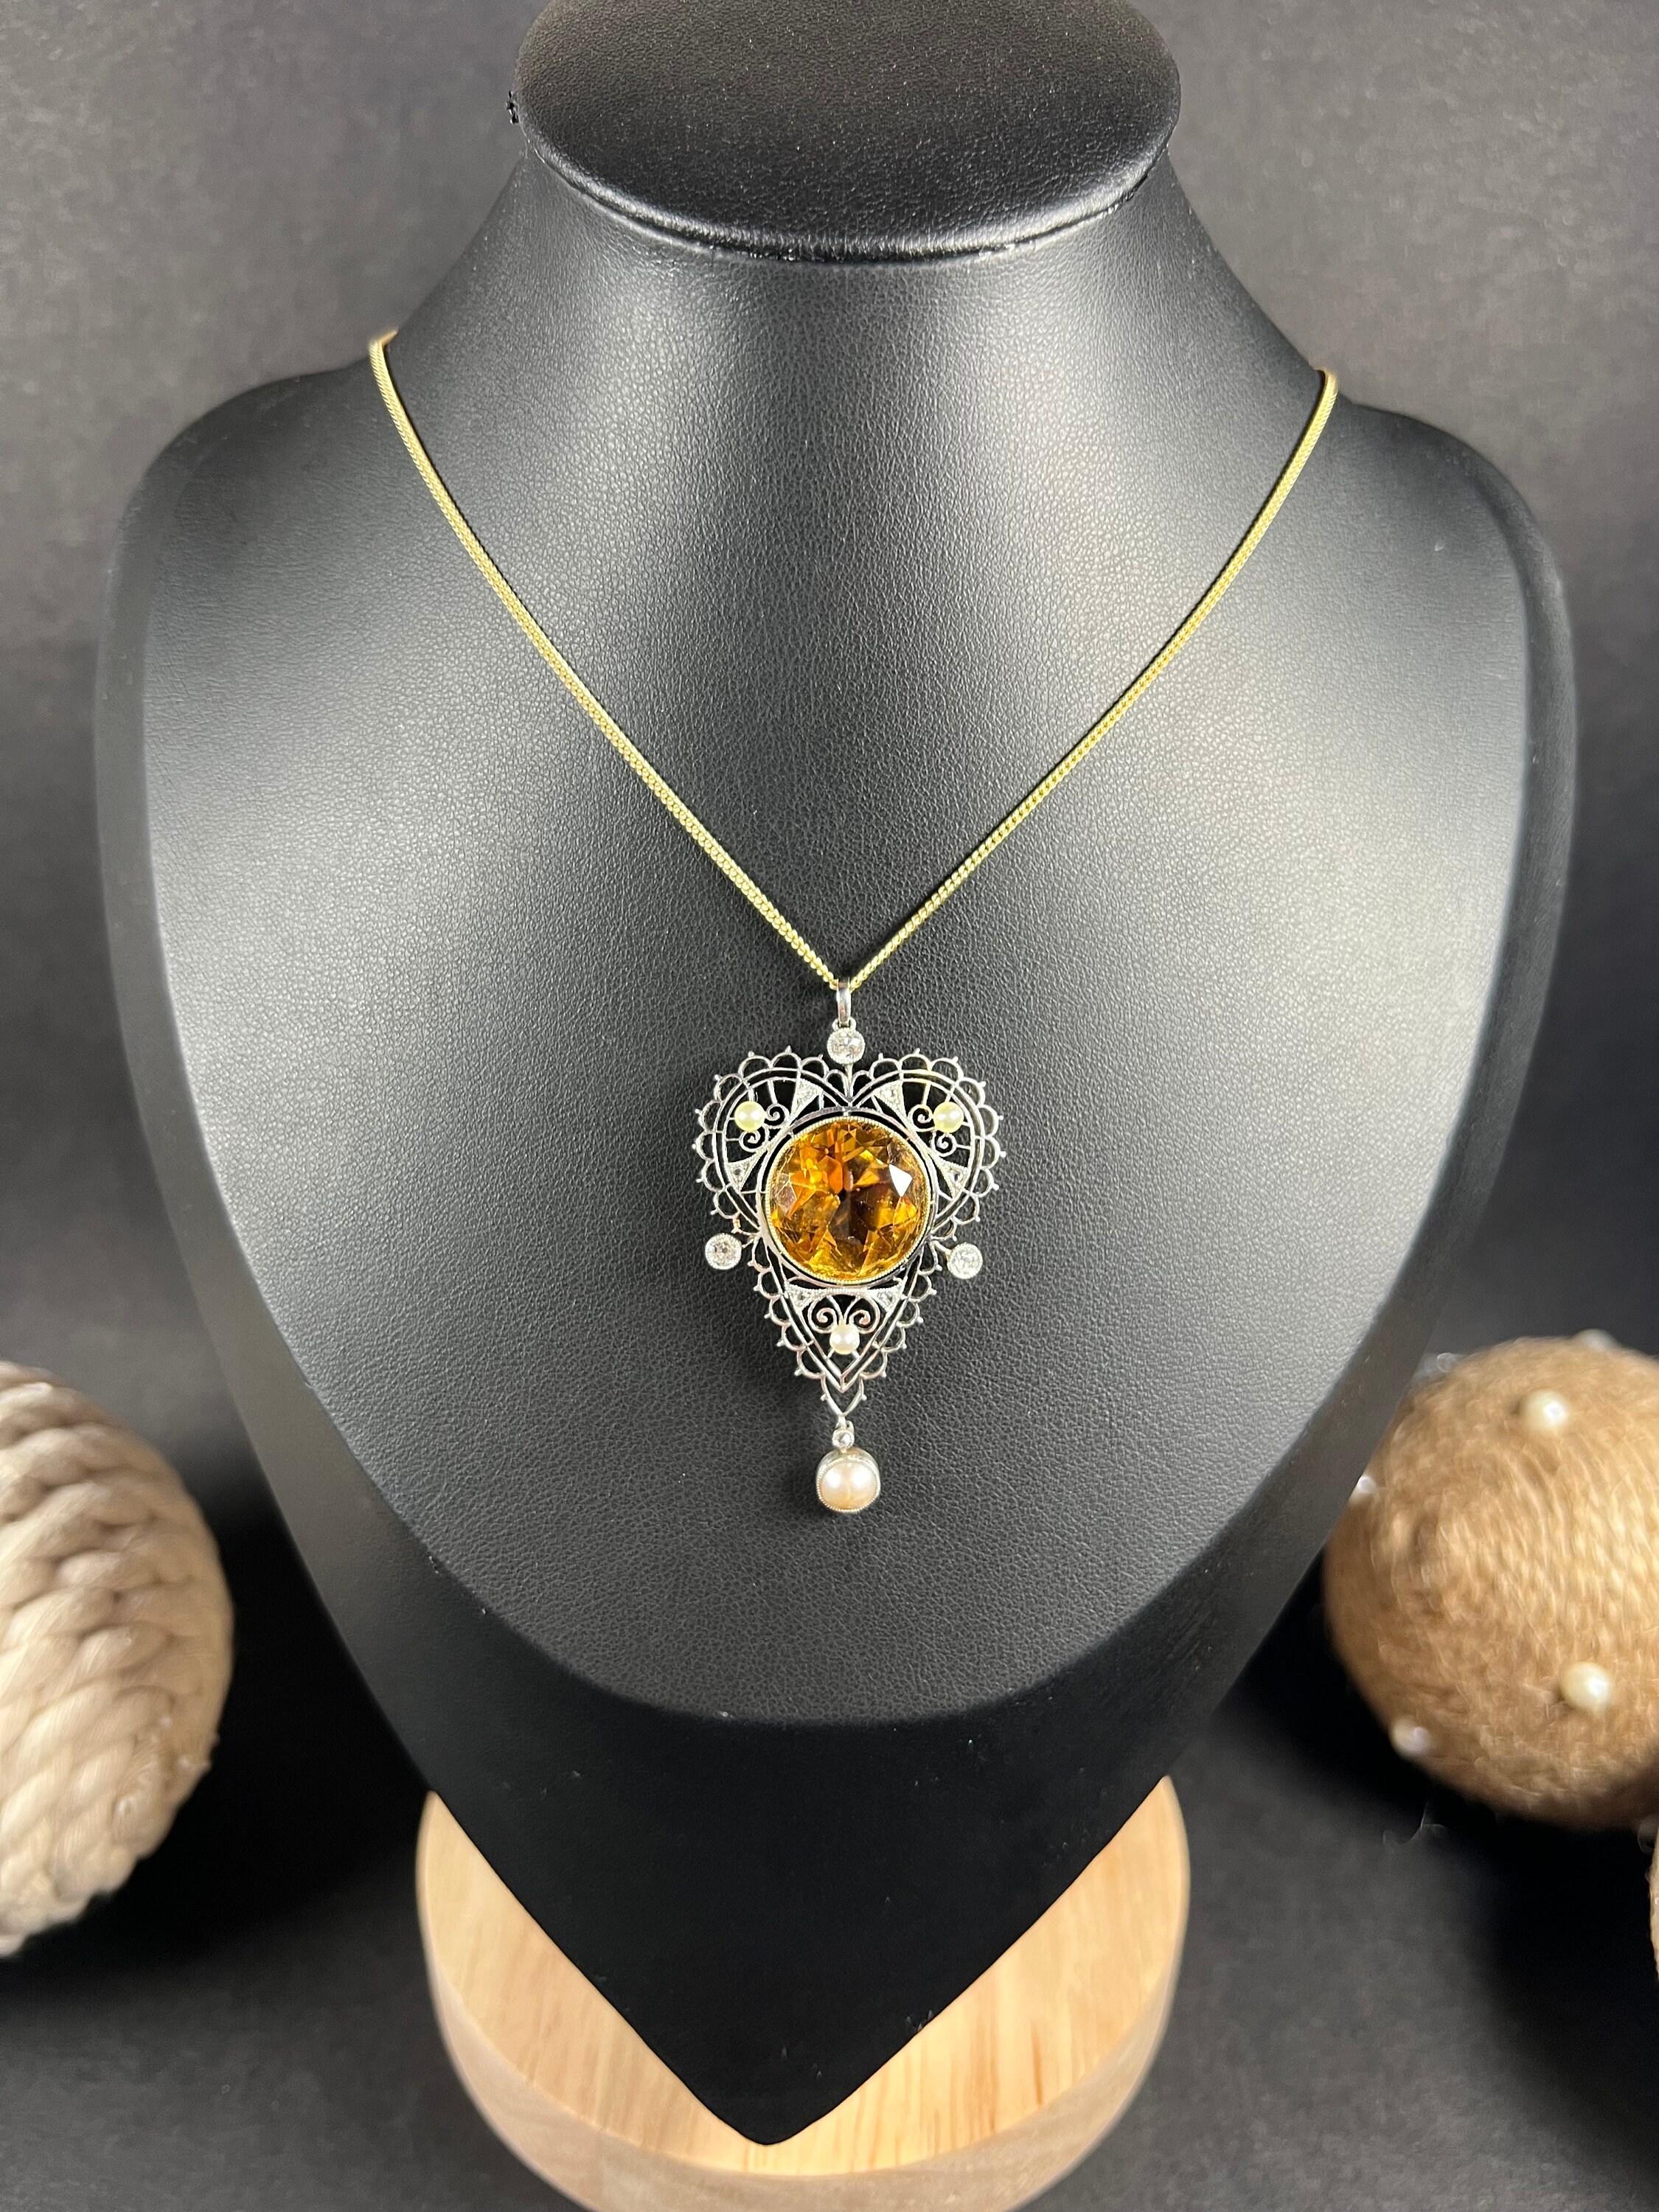 Antique Citrine Necklace 

18ct Gold & Platinum Tested

Circa 1900

This exquisite Edwardian pendant is a perfect blend of vintage charm and contemporary elegance. Crafted with 18ct gold and platinum, this pendant features a large, round-faceted